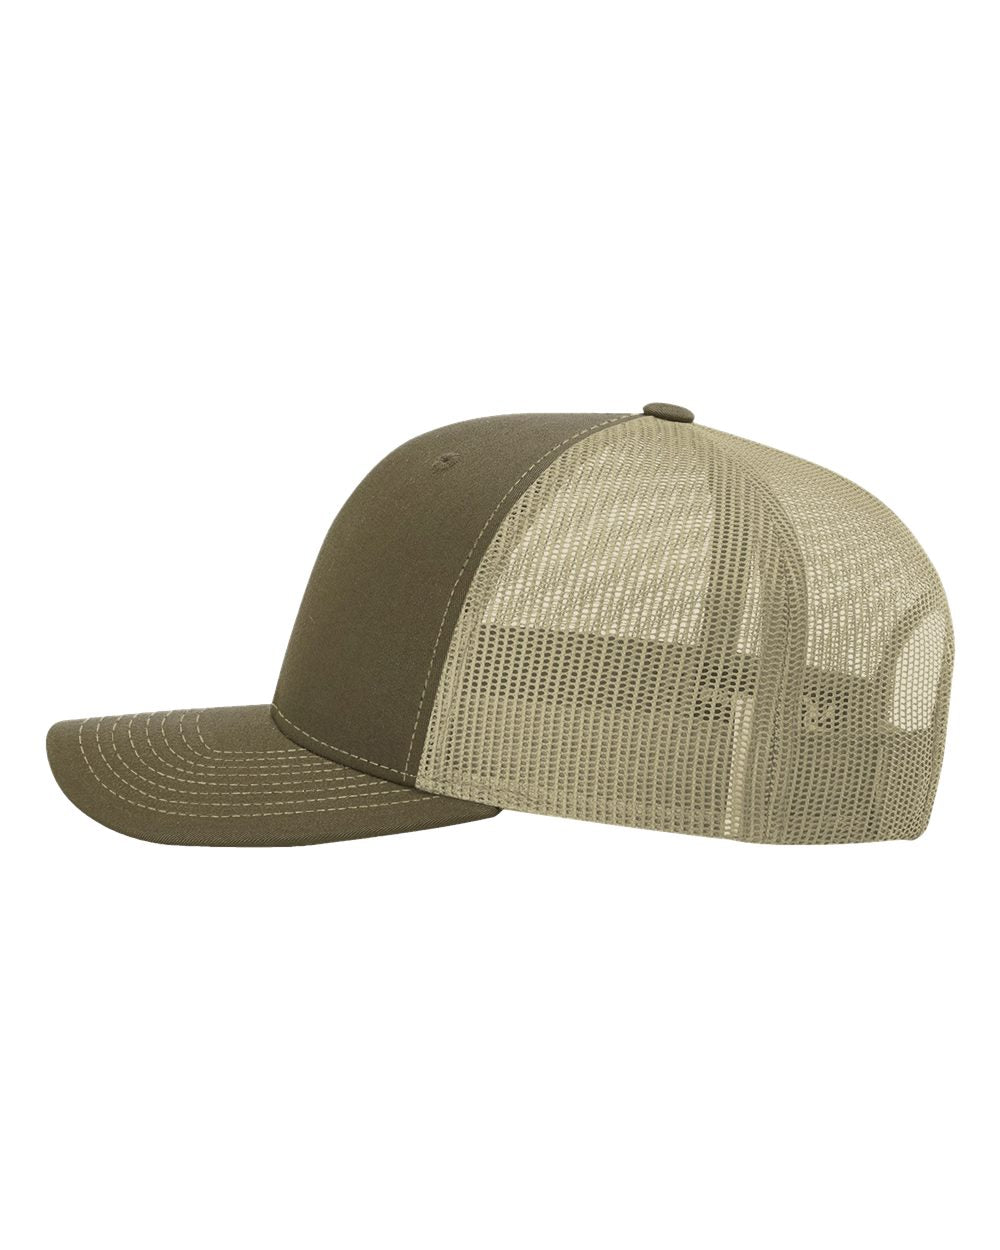 Kelly Hughes Stateline Richardson Cap with Rustic Patch